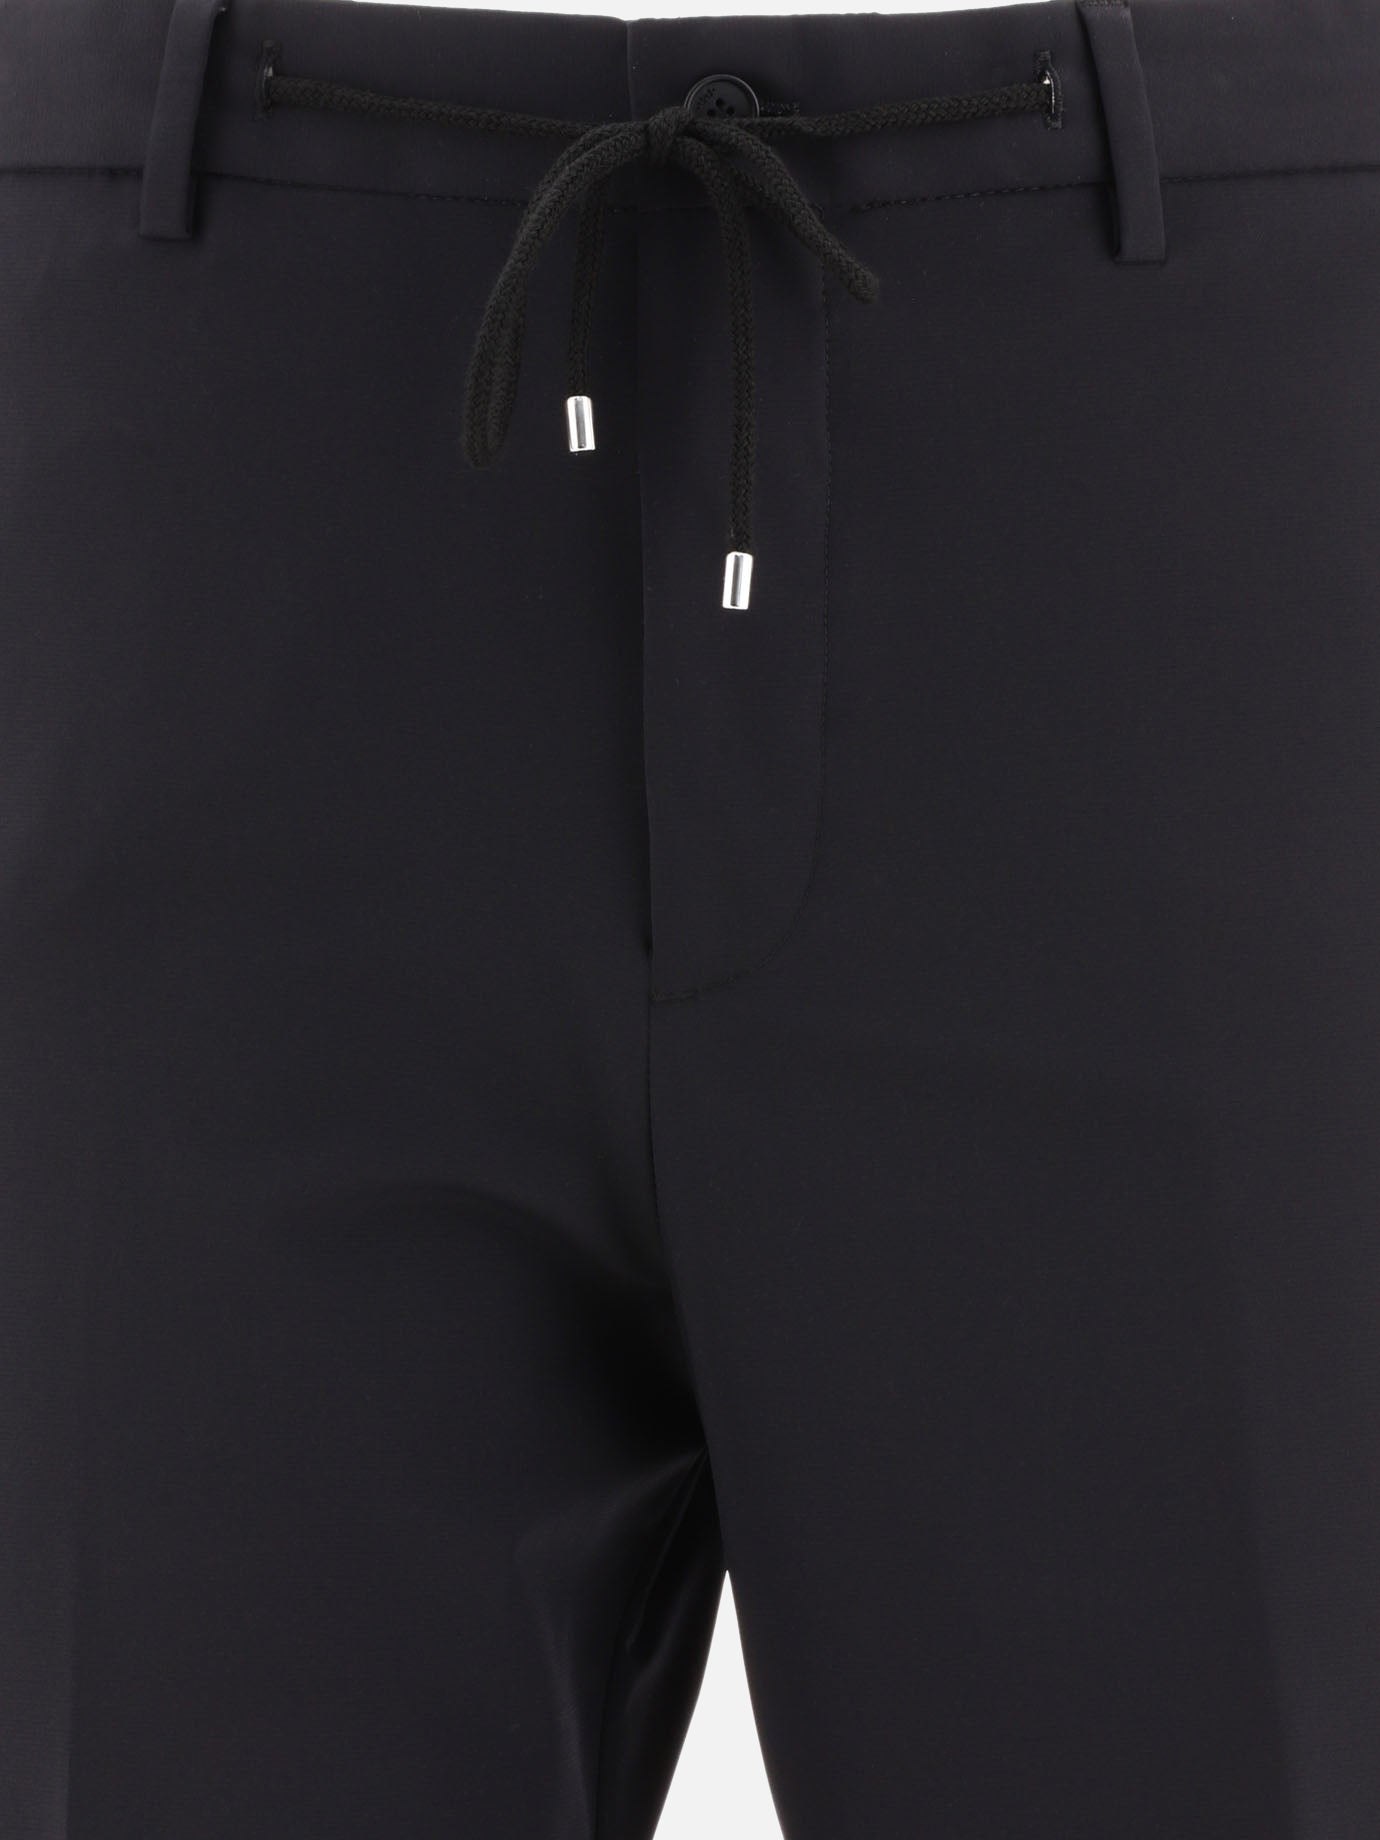 "Montreal" trousers